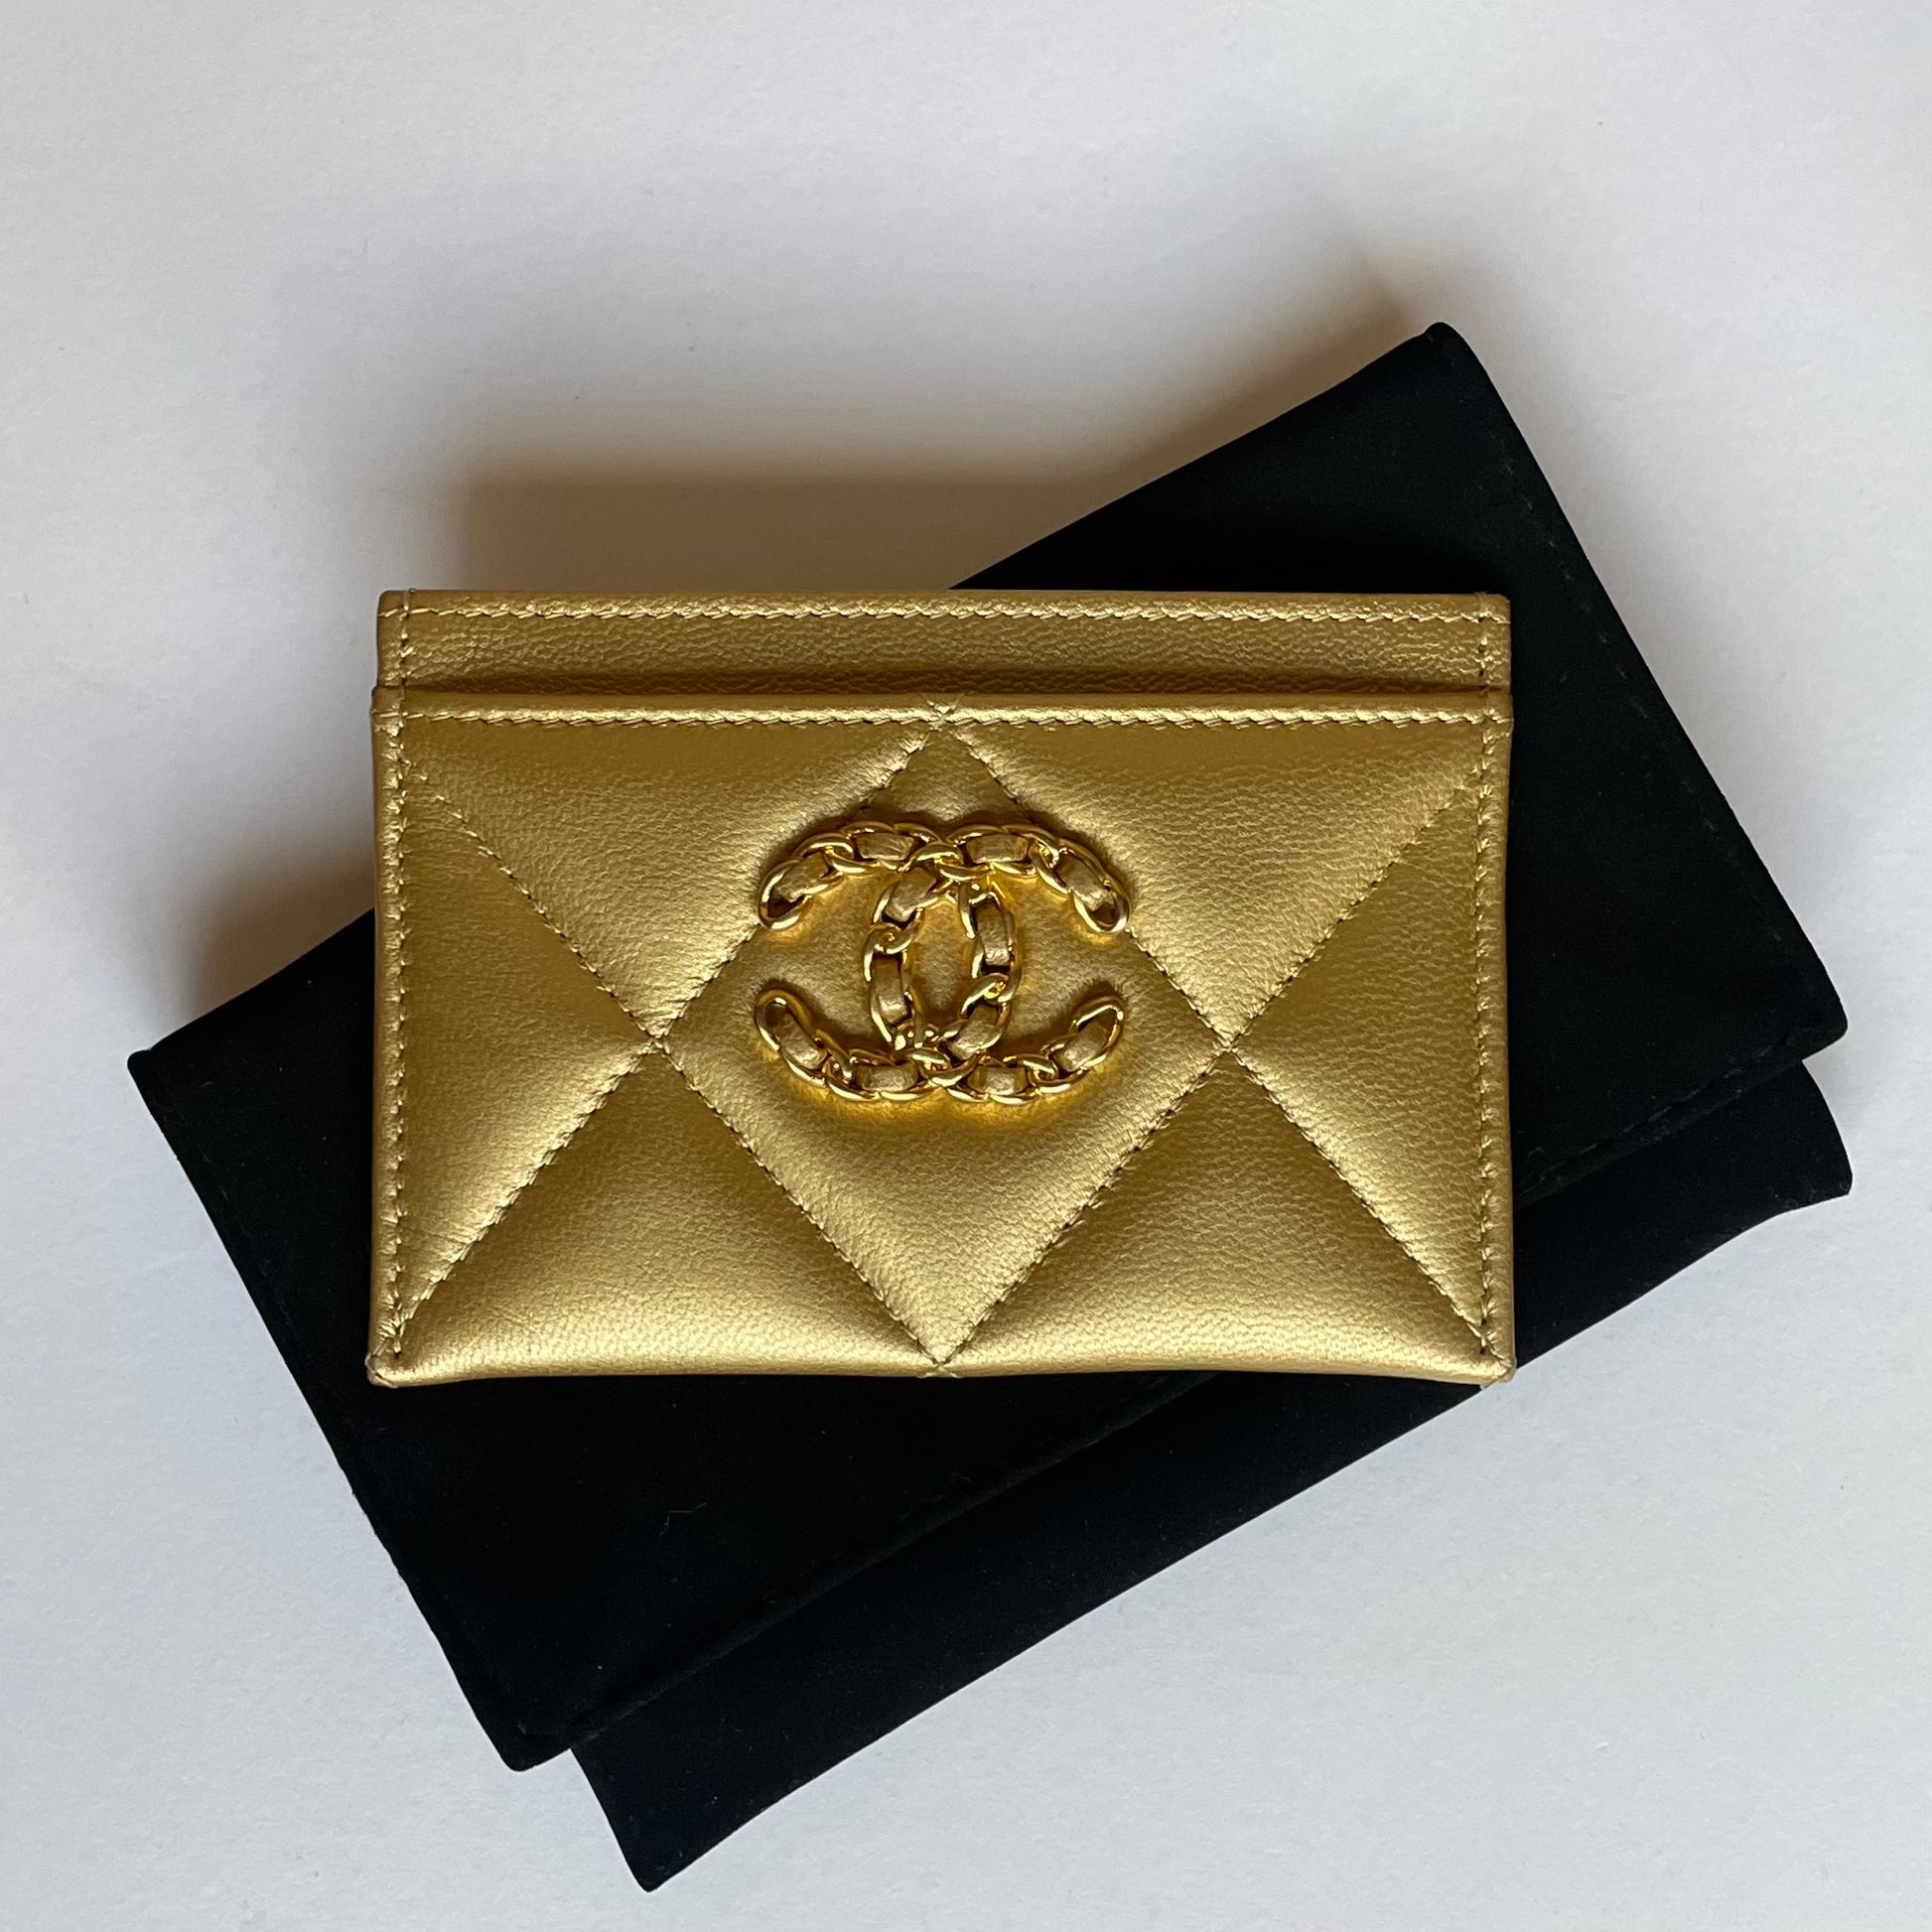 Chanel 19 Metallic Quilted Lambskin Cardholder